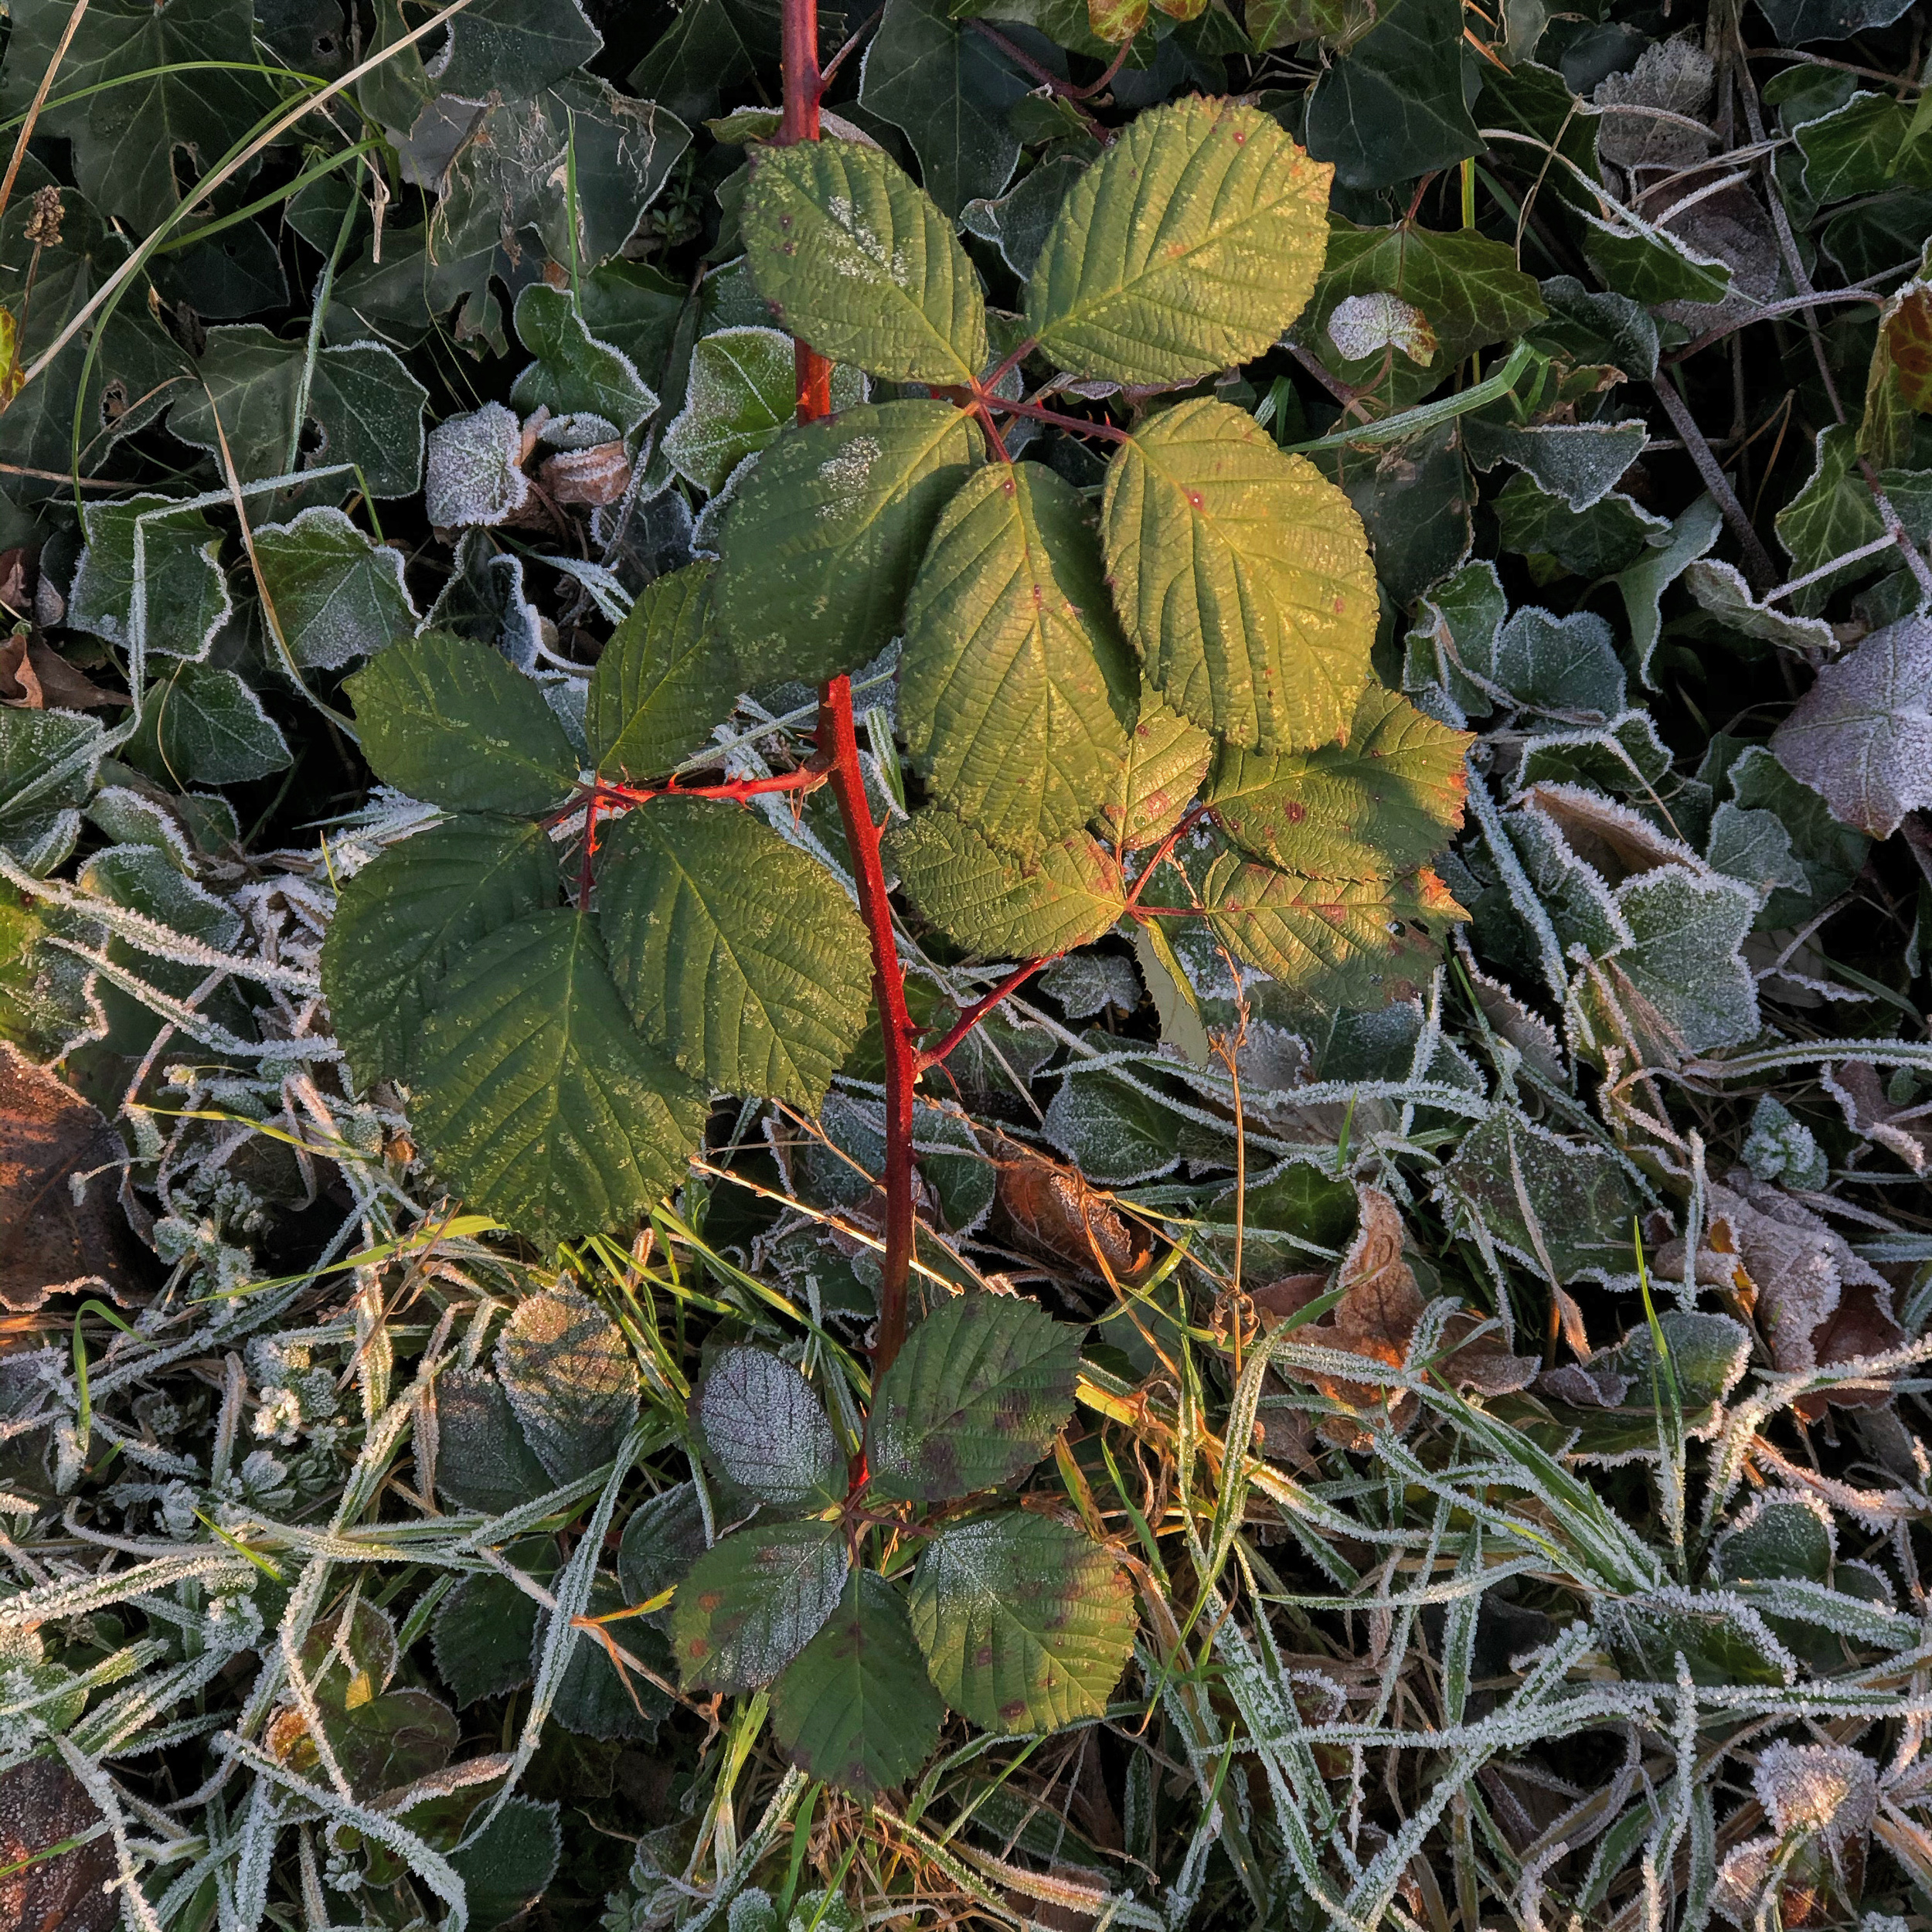 On the edge of frost